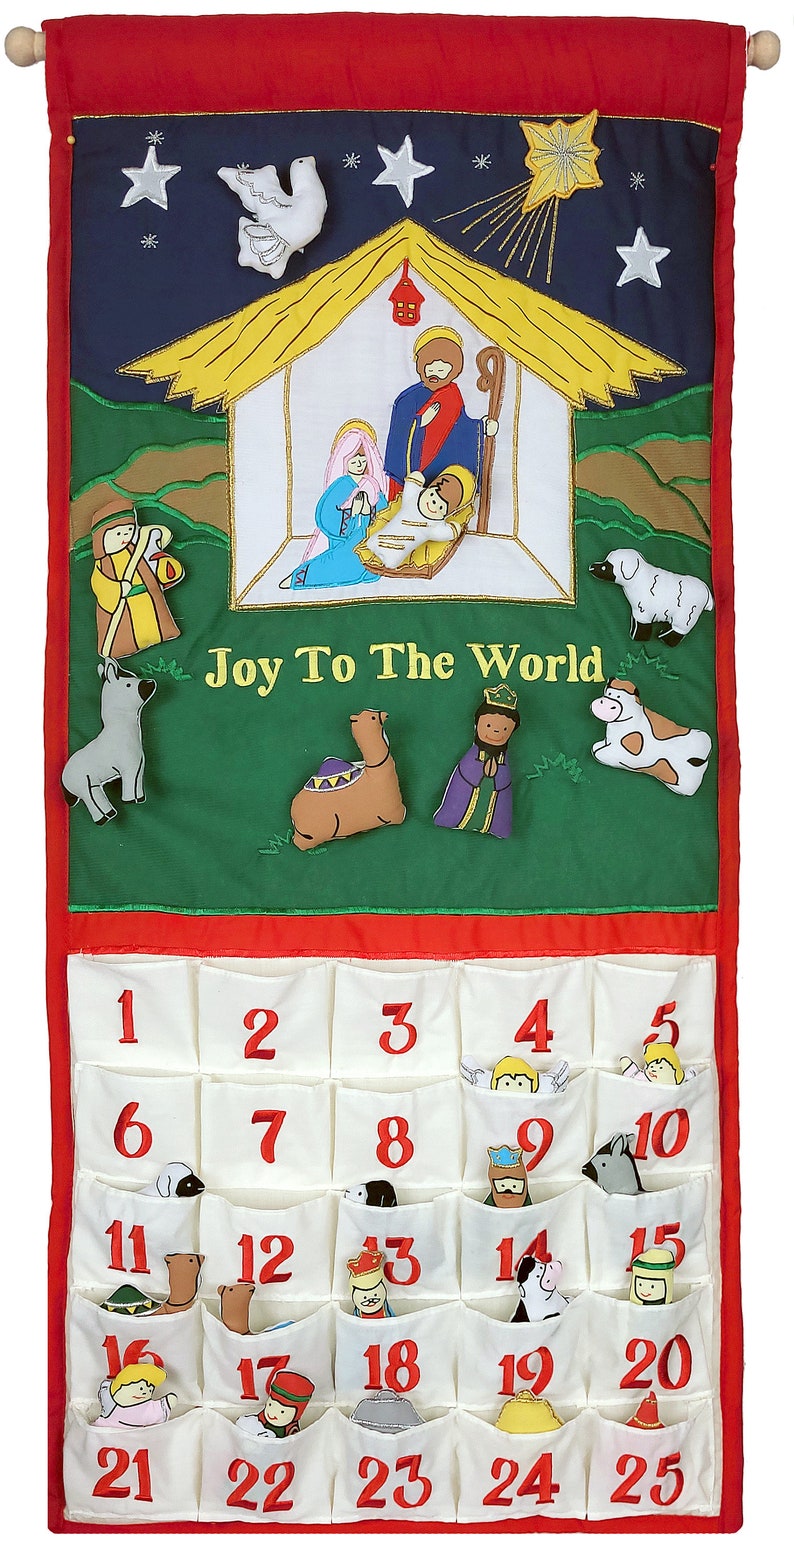 Personalized Traditional Manger Cloth Nativity Advent Calendar Christian Family & Kids Christmas Countdown Ornaments by Pockets of Learning add Joy to the World